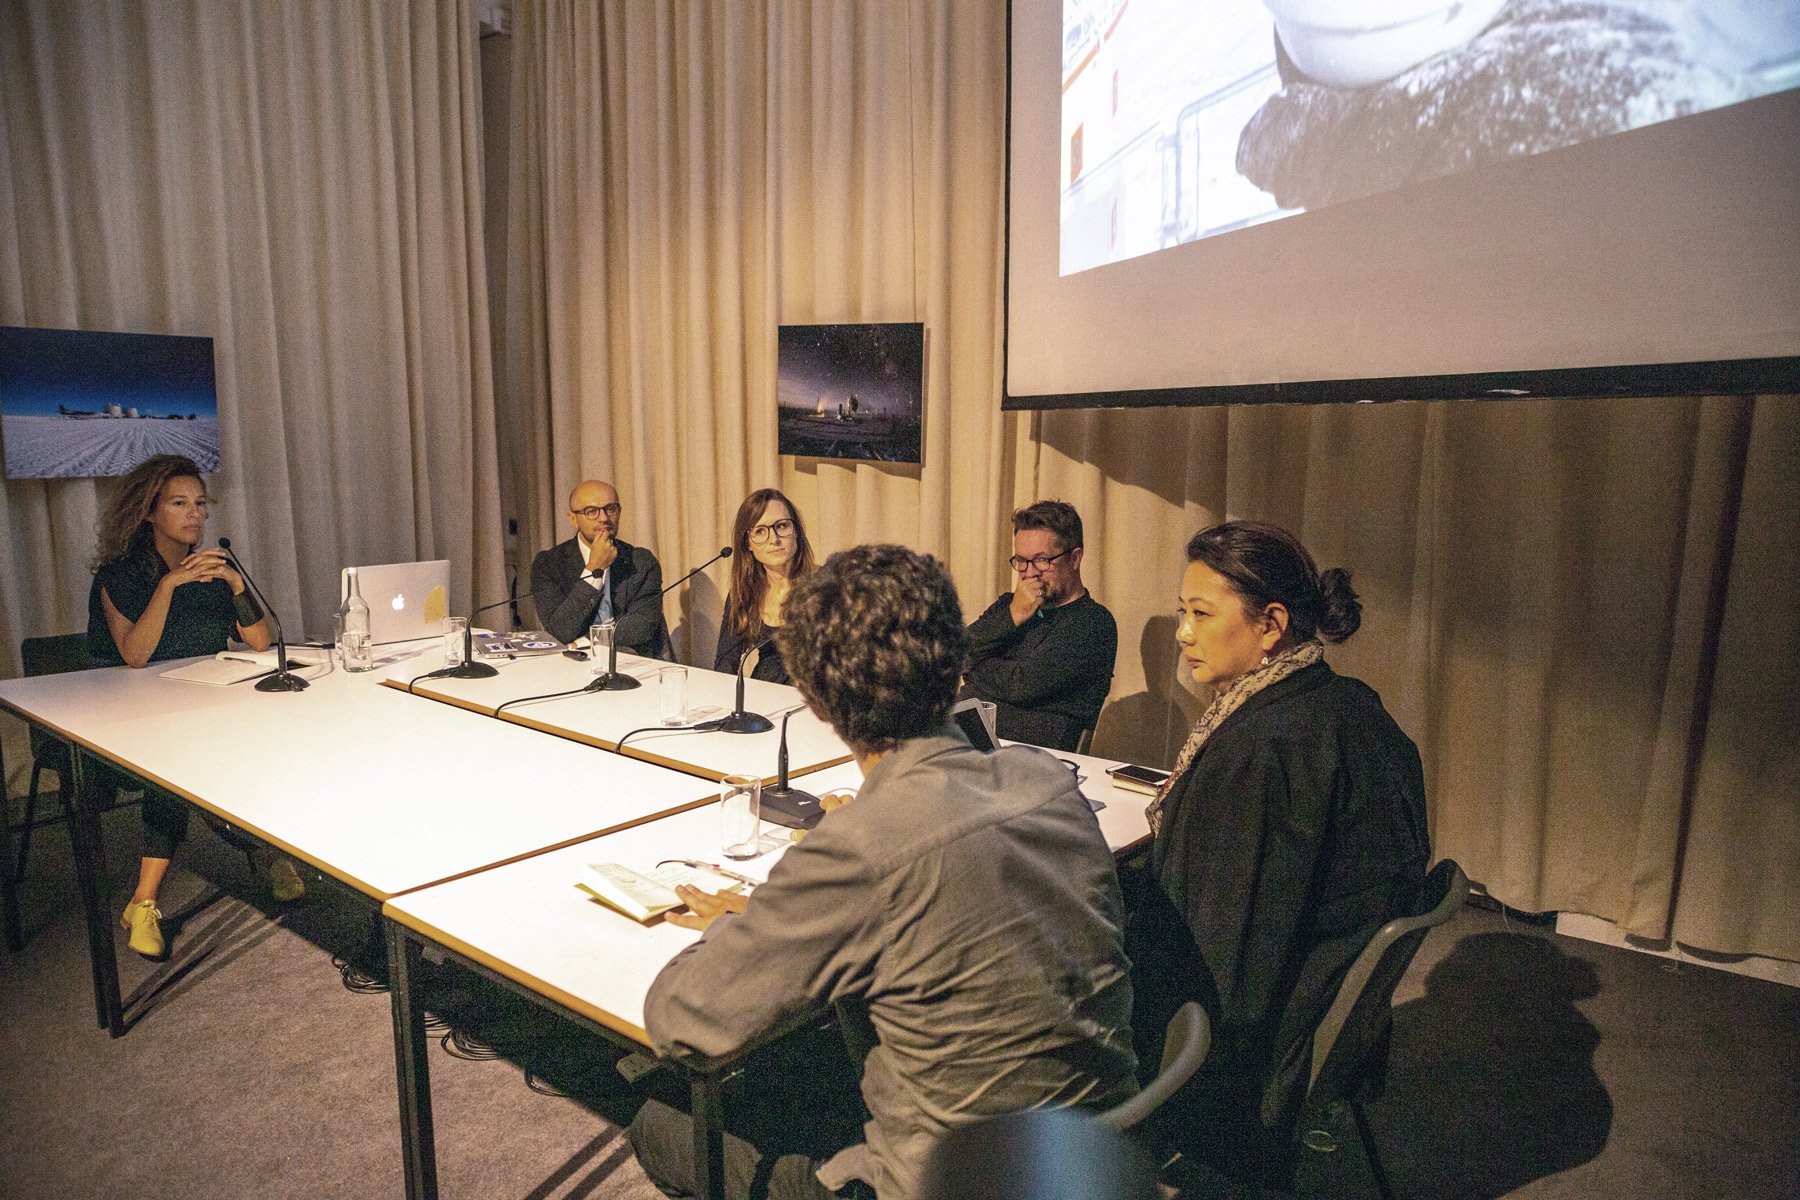 03_2019_UNLESS_SYMPOSIUM_ARCHITECTURE-IN-THE-EXREME_ROUND-TABLE.jpg